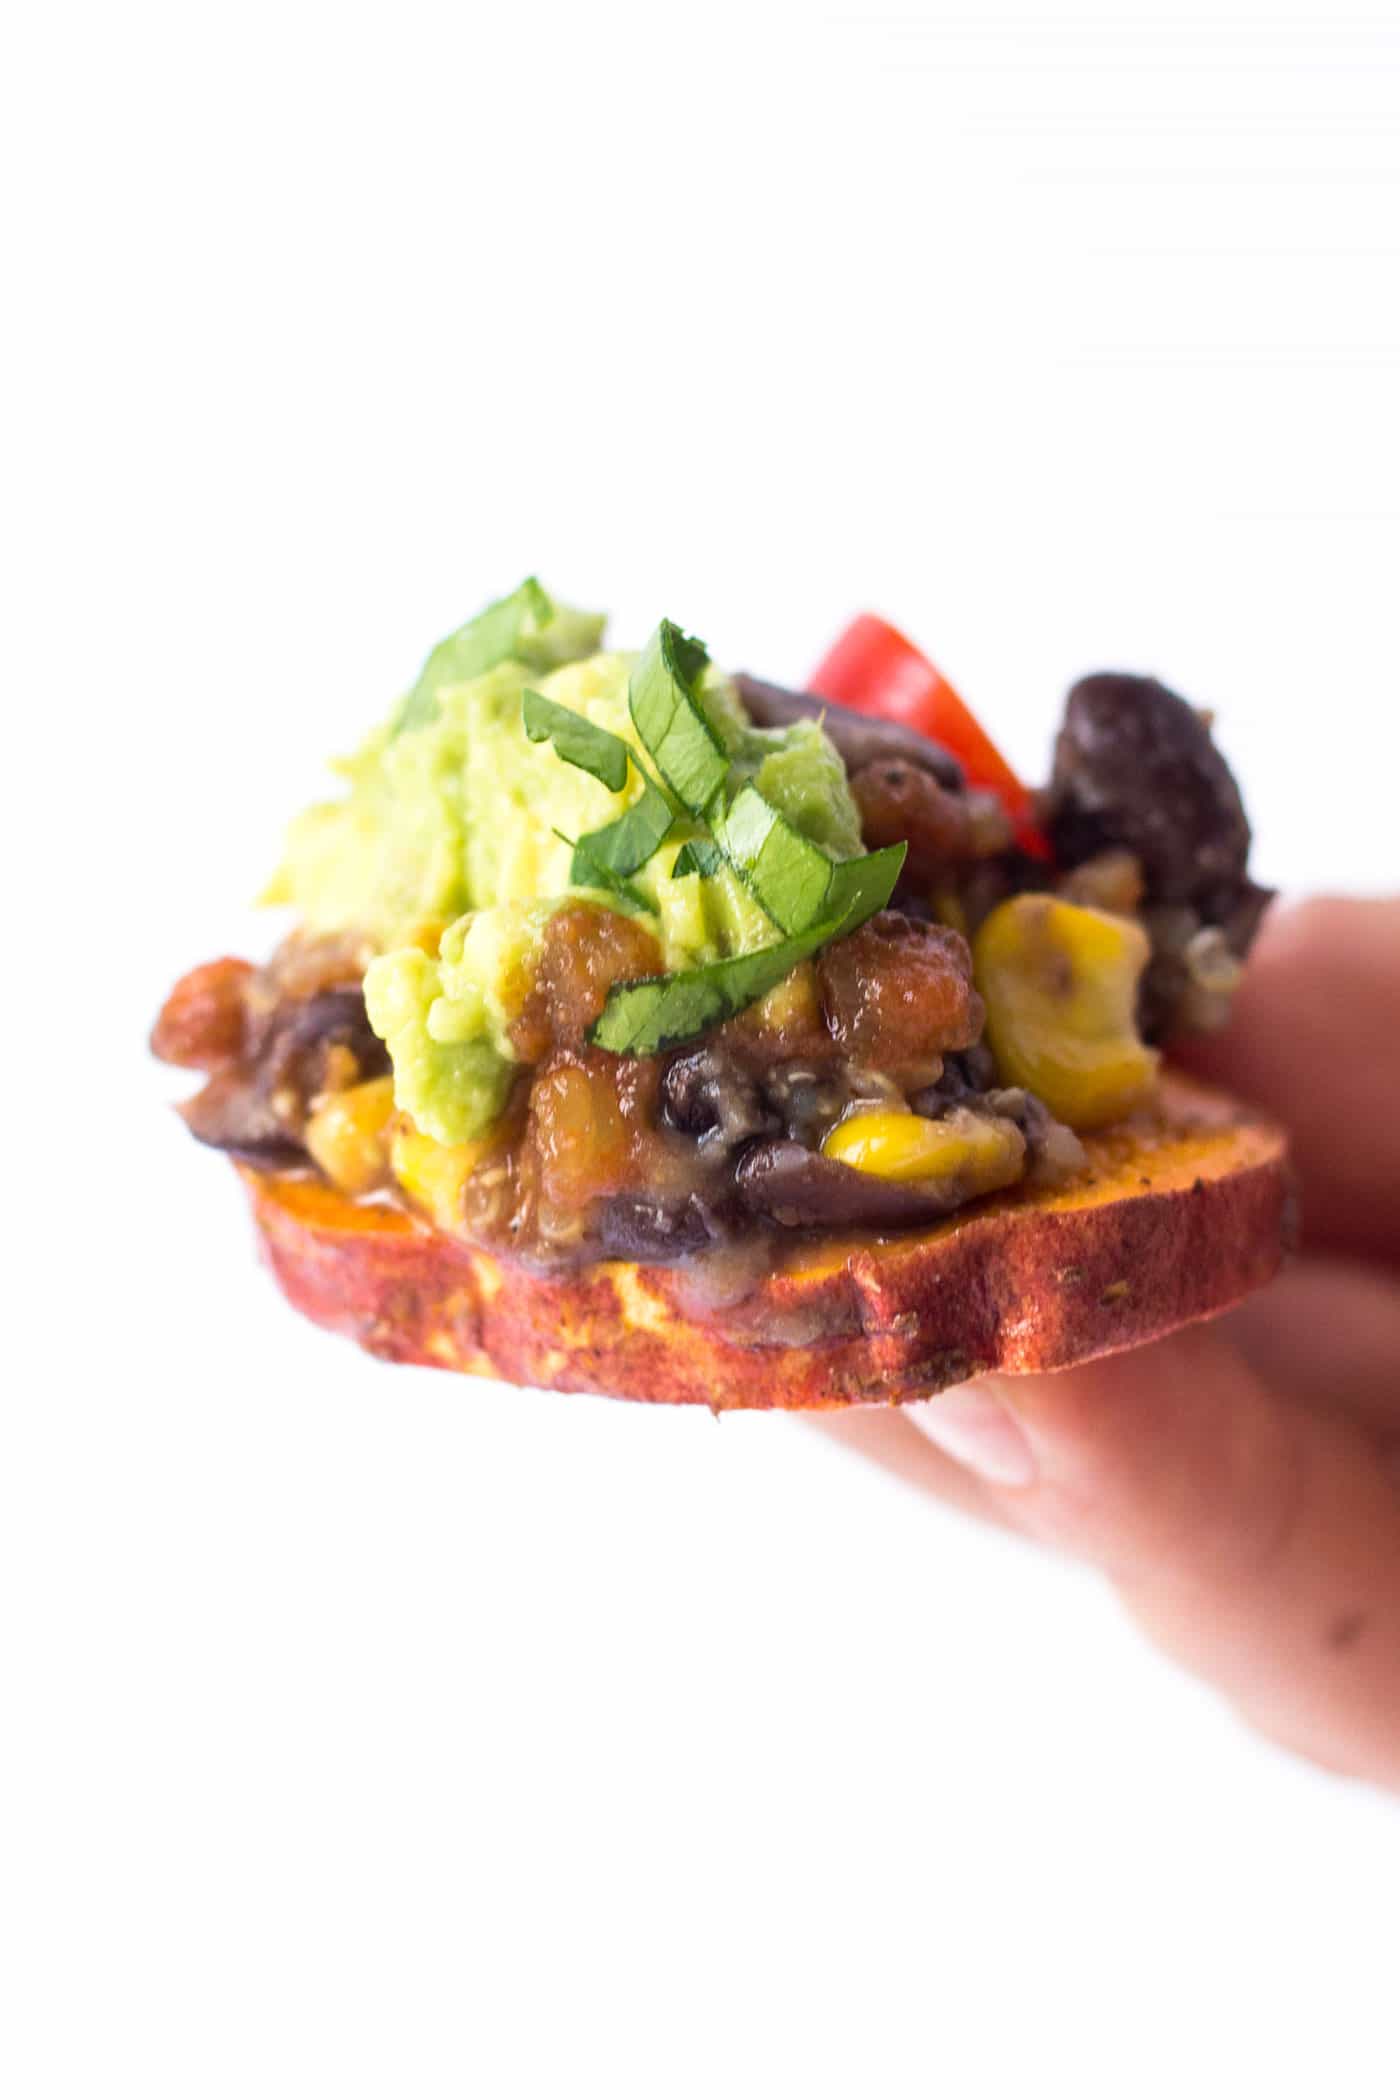 The BEST DAMN vegan nachos ever! Made with sweet potatoes, quinoa, black beans and topped with salsa + guac!